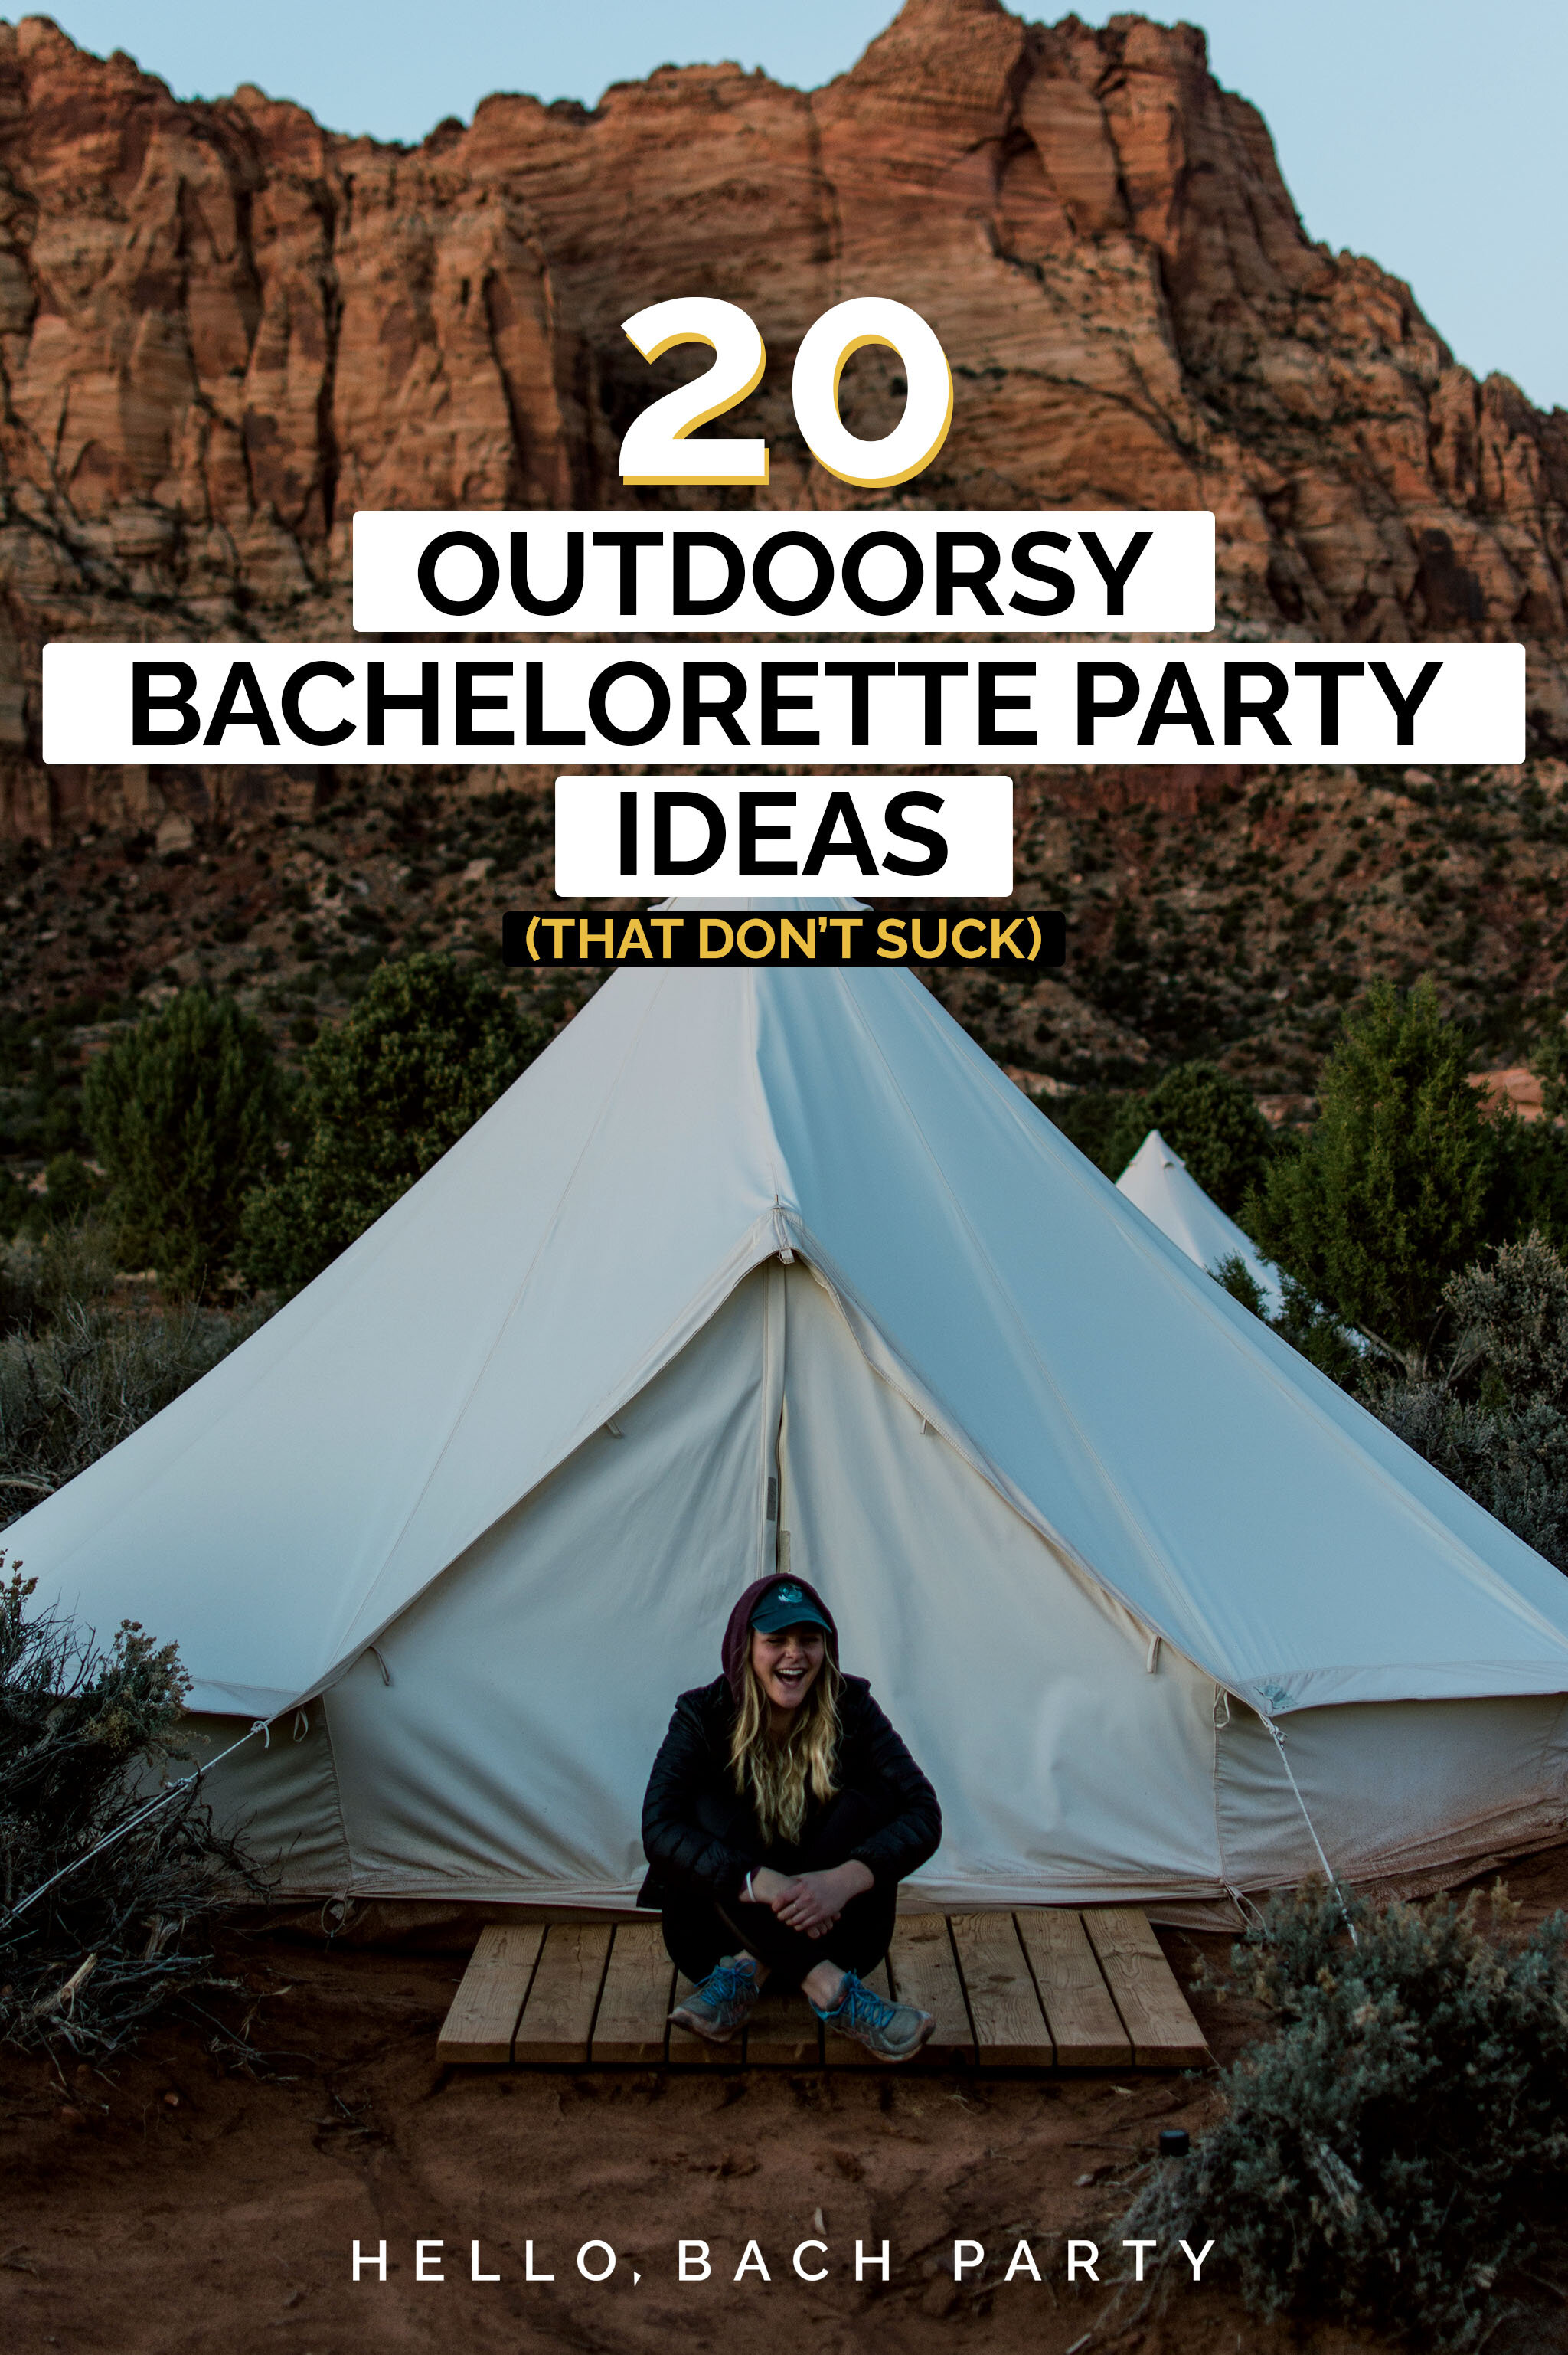 Bachelorette Party Ideas for the Outdoorsy Bride - The Complete